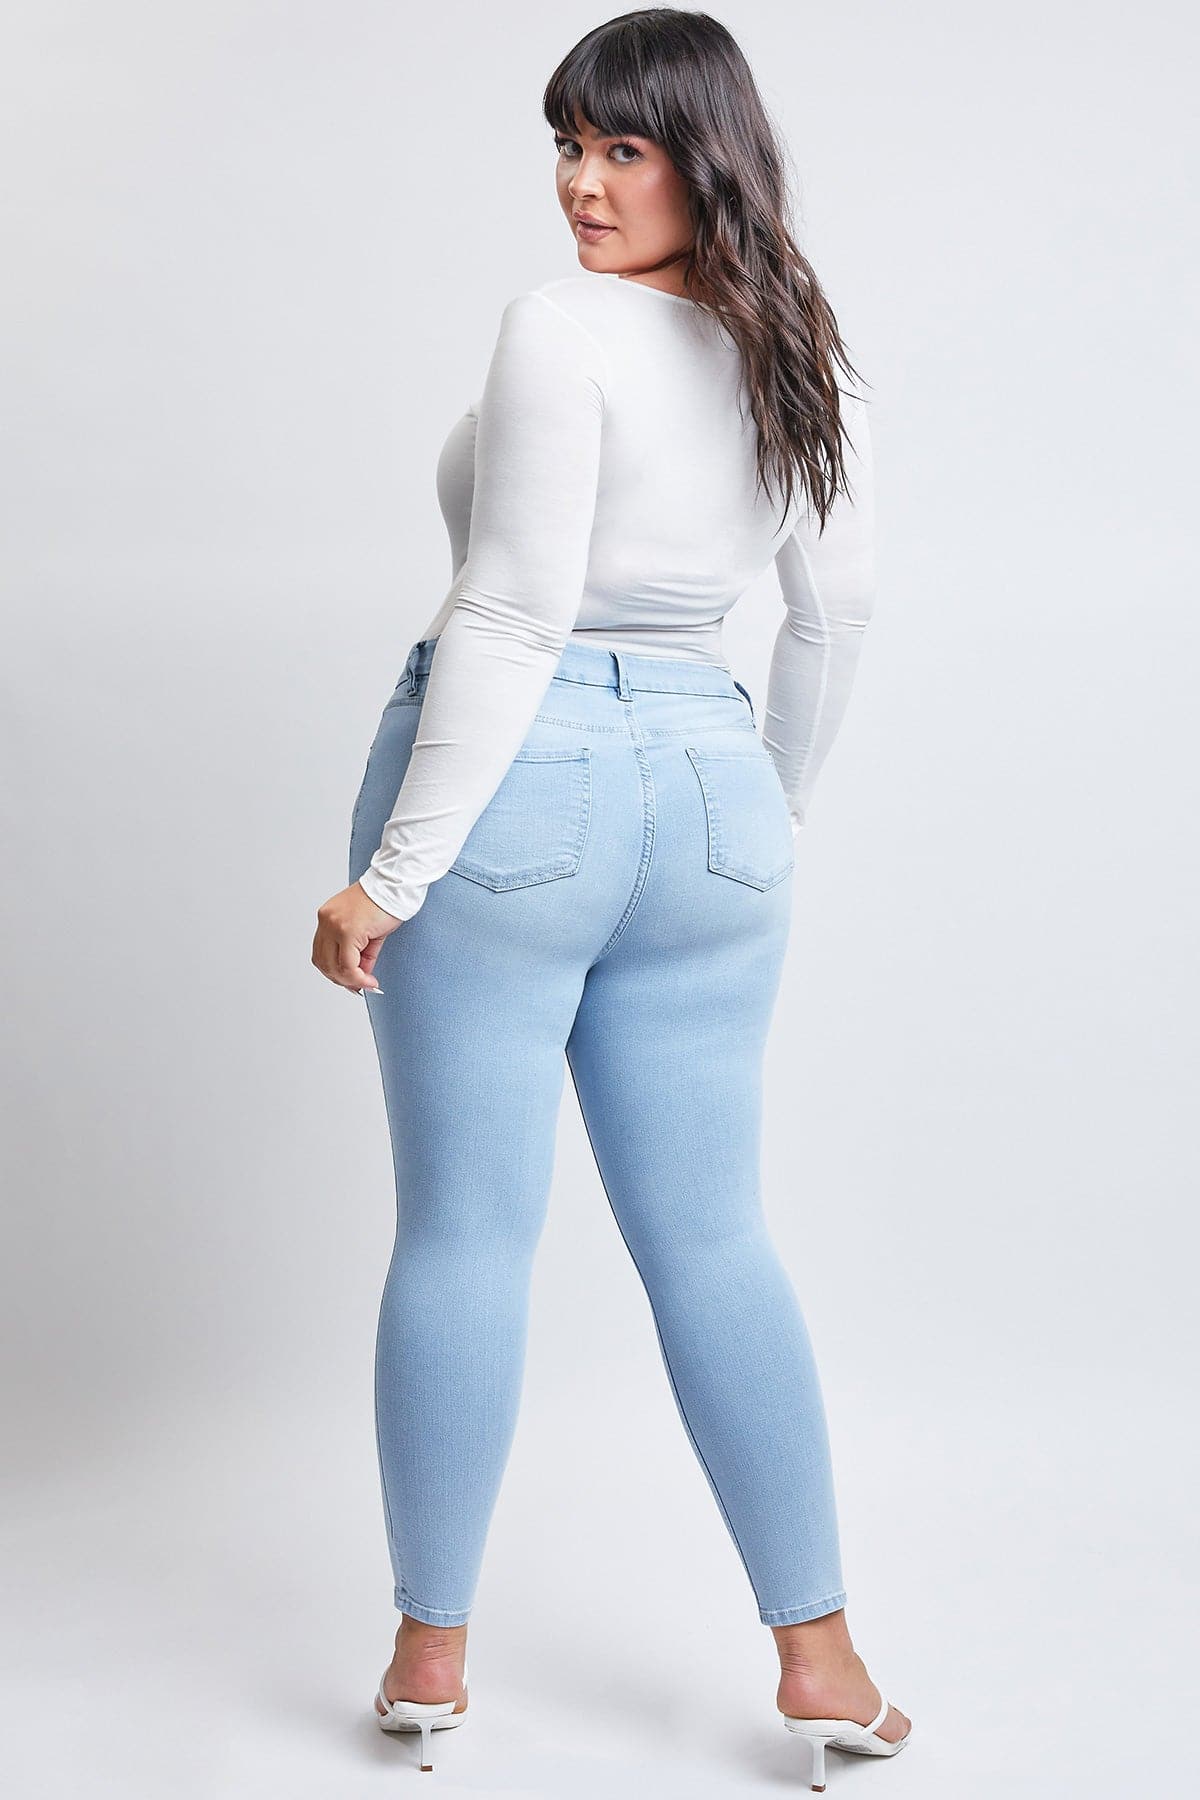 Plus Size Women's Sustainable Curvy Fit  Skinny Jeans